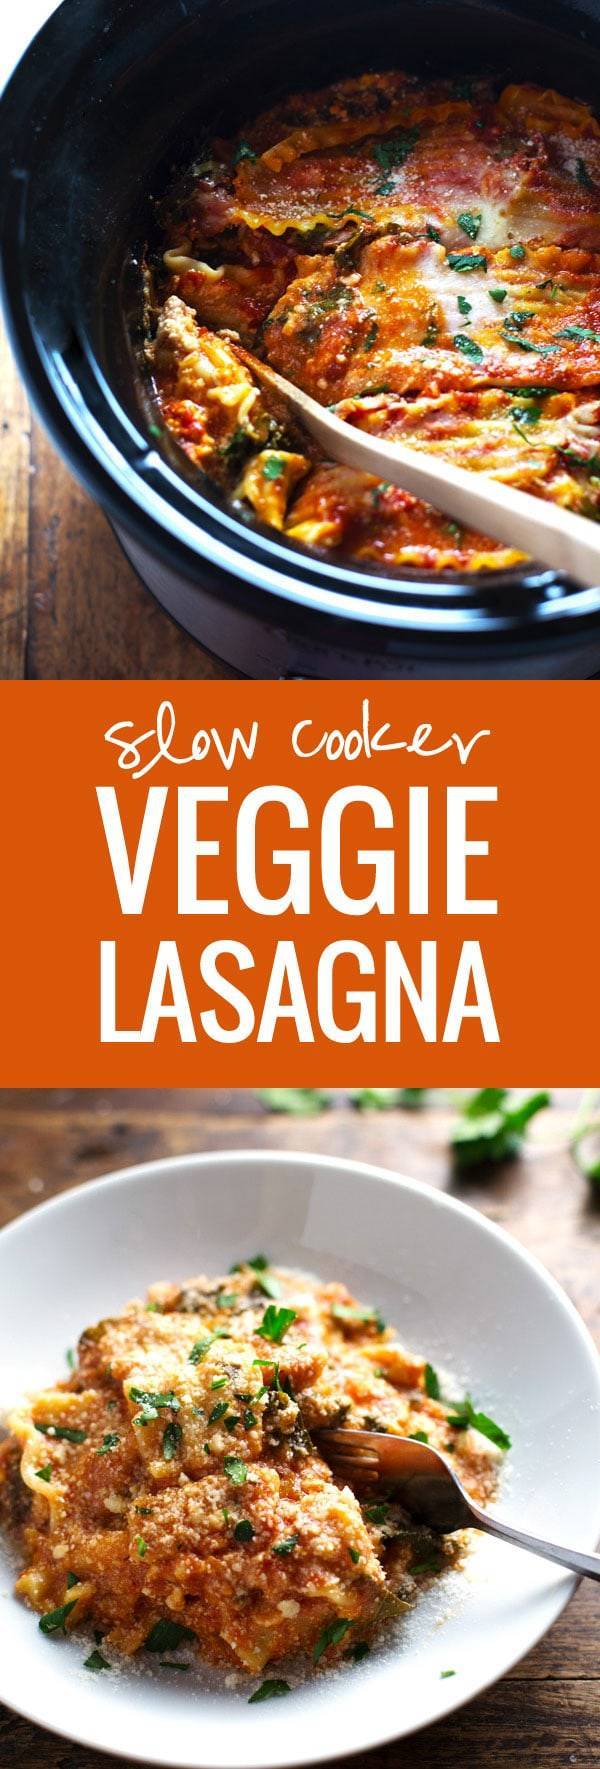 Super Easy Skinny Veggie Crockpot Lasagna - a handful of simple ingredients for a healthy family dinner. | https://pinchofyum.com